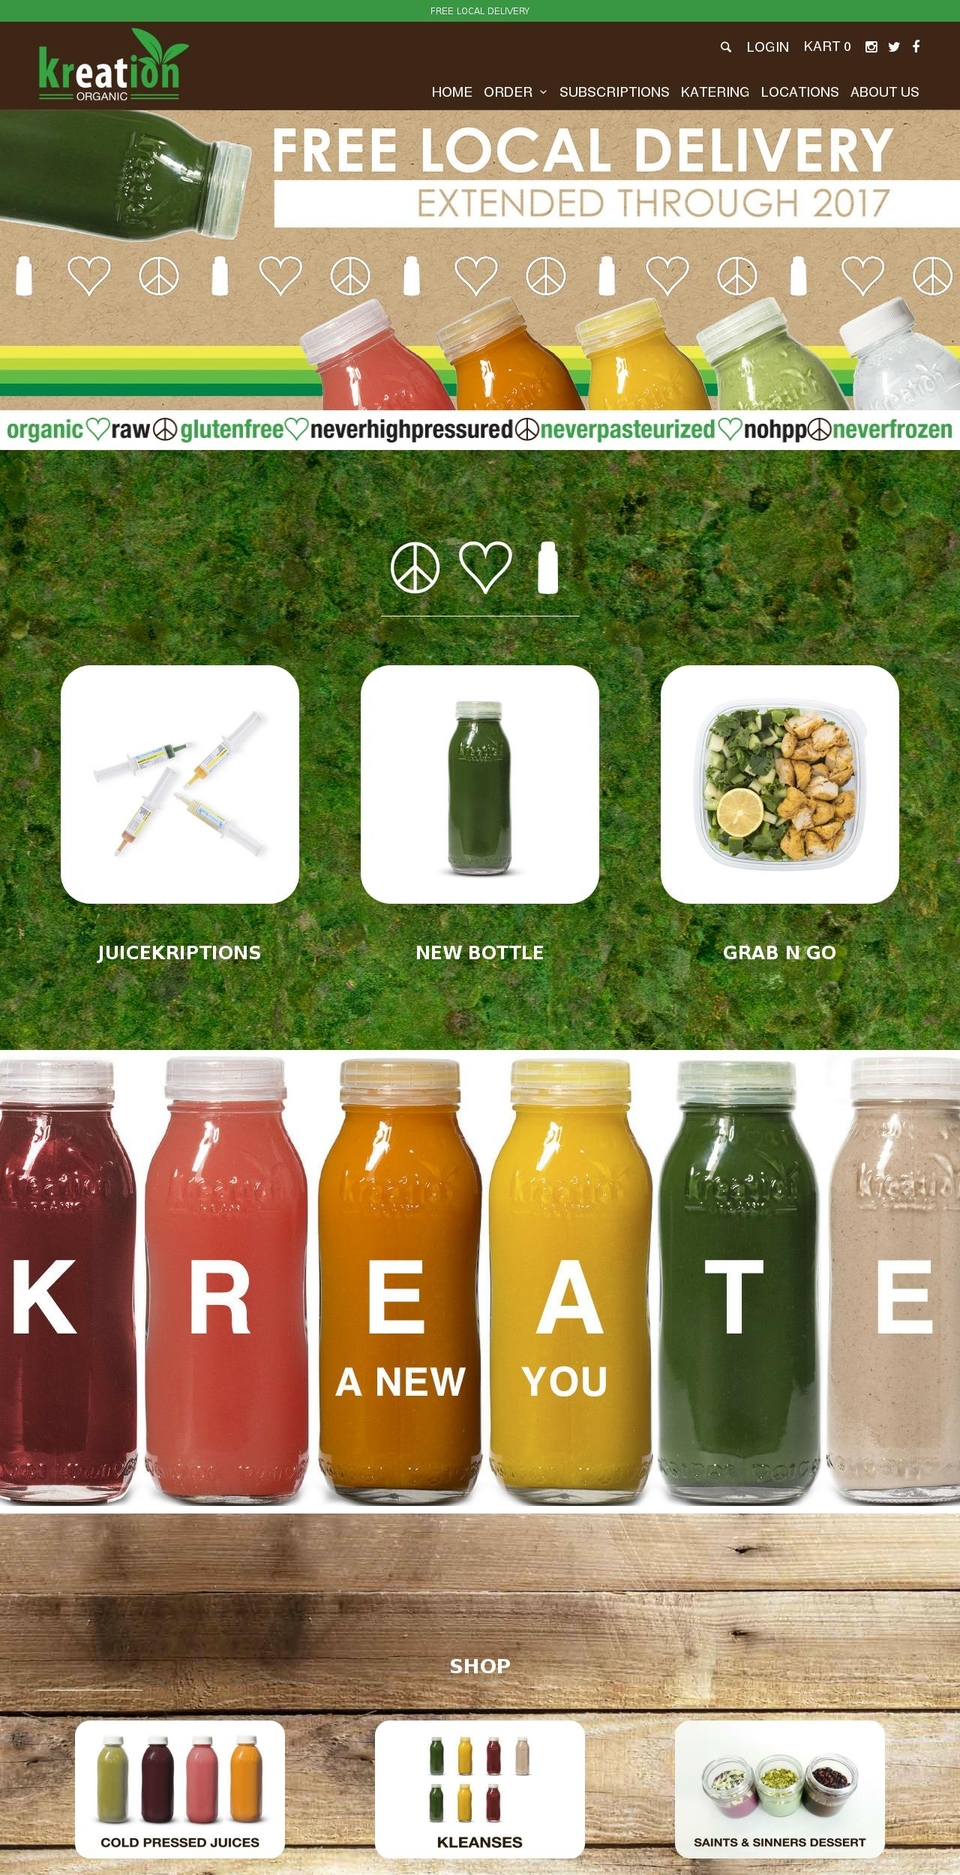 Flow Shopify theme site example kreationjuice.com